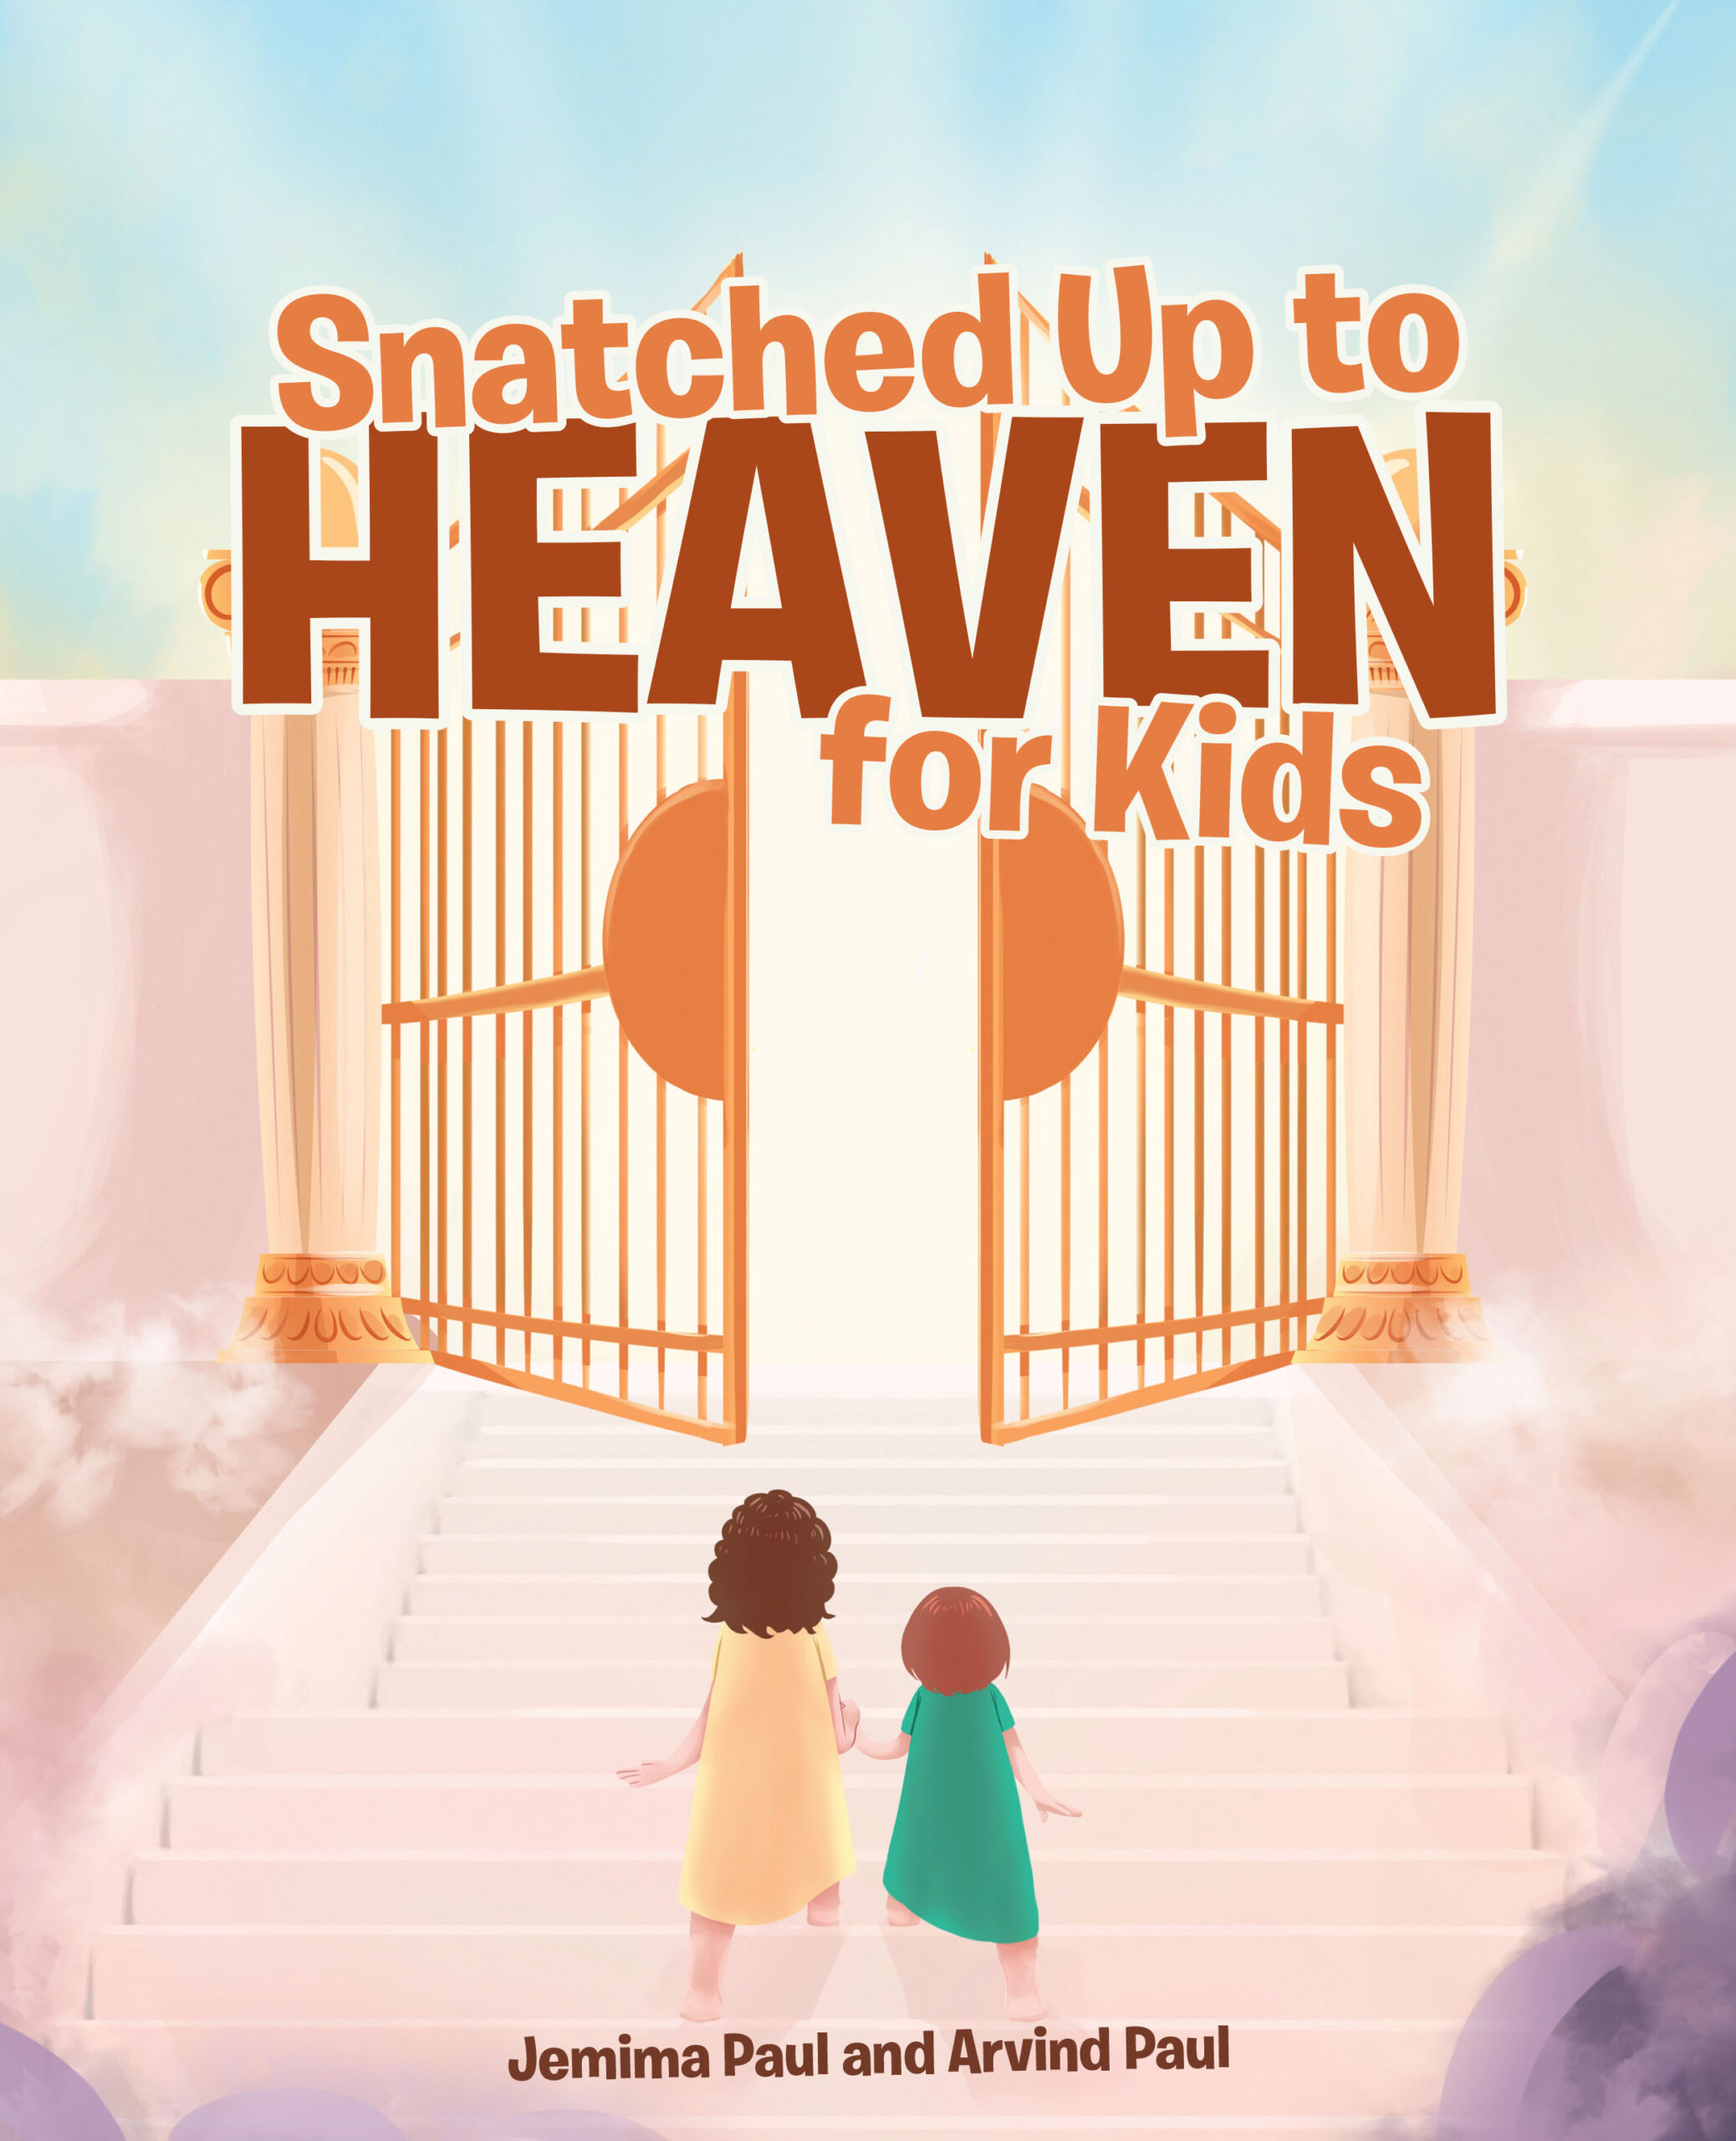 FREE: Snatched Up to Heaven for Kids by Jemima Paul and Arvind Paul